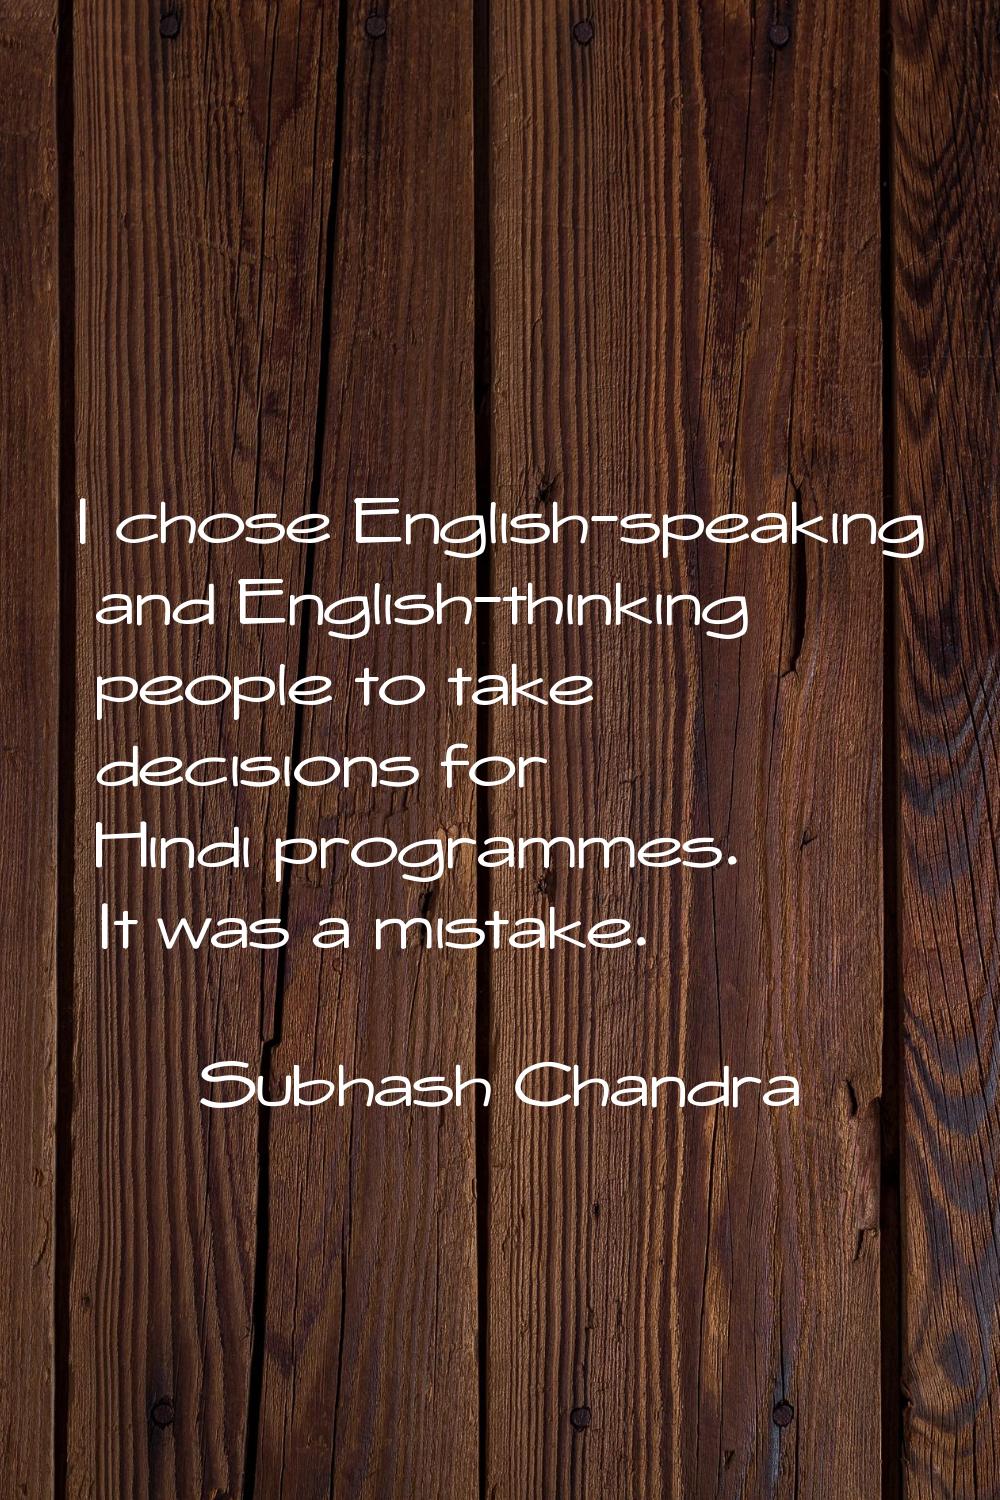 I chose English-speaking and English-thinking people to take decisions for Hindi programmes. It was